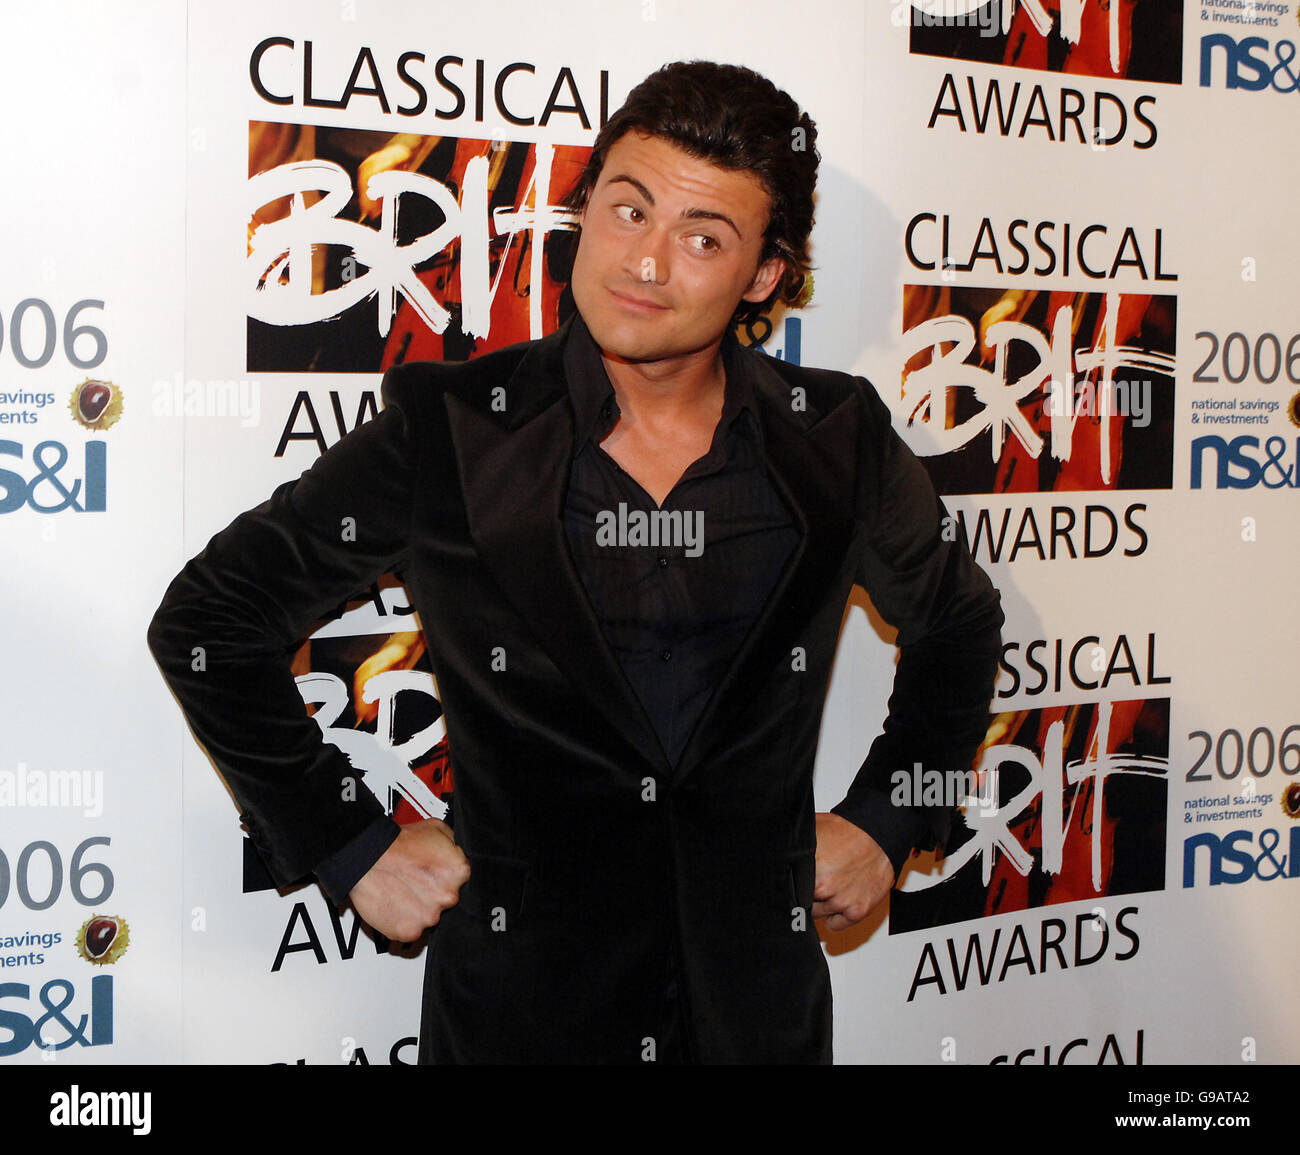 Vittorio Grigolo during the Classical Brit Awards, at the Royal Albert Hall, central London. Stock Photo